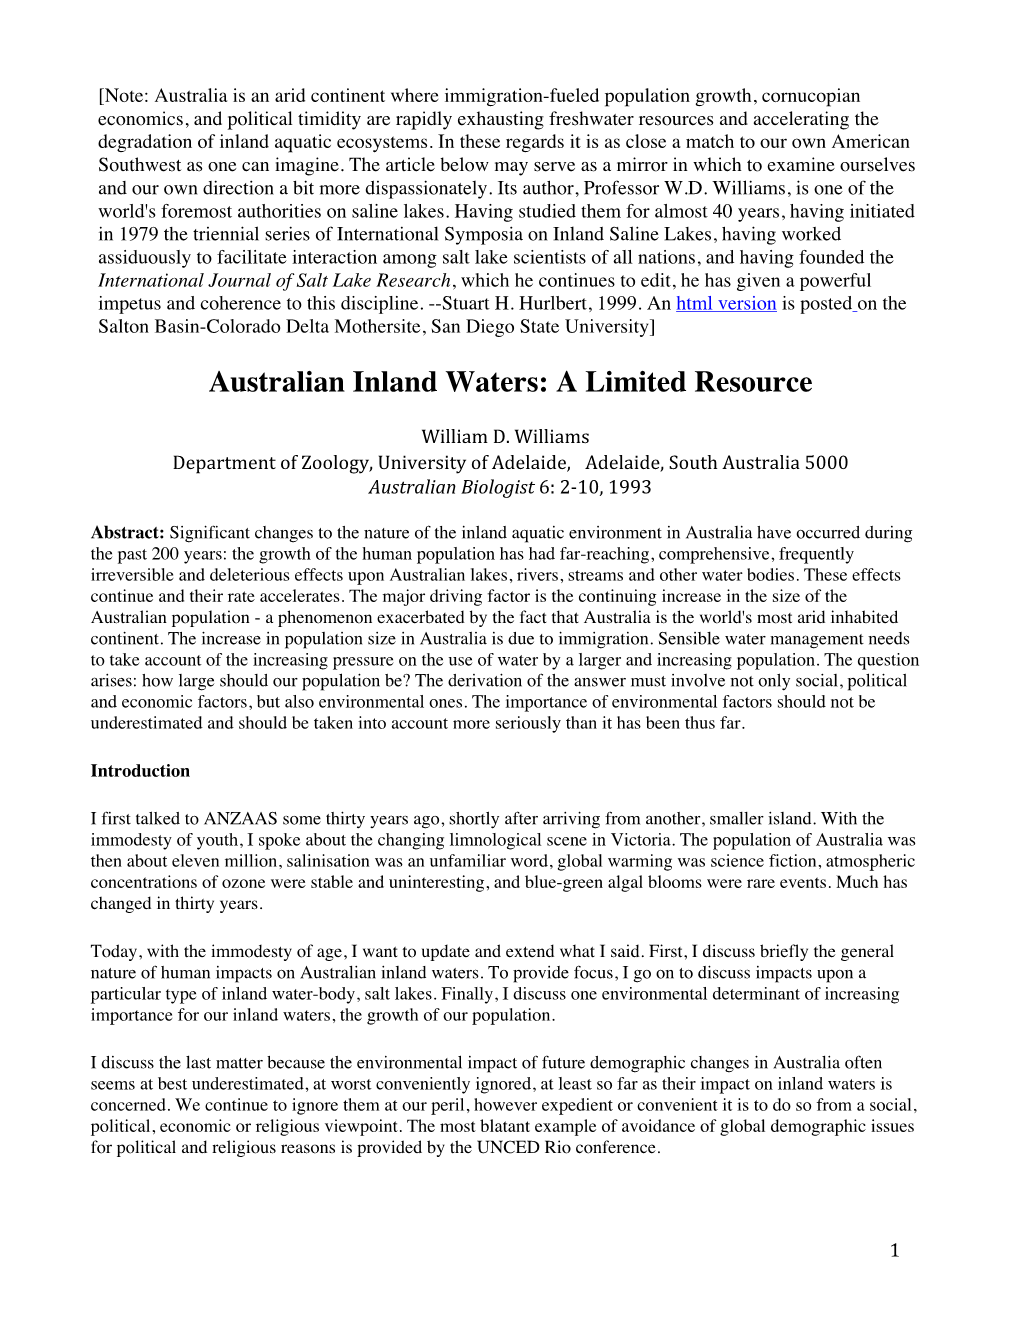 Australian Inland Waters: a Limited Resource